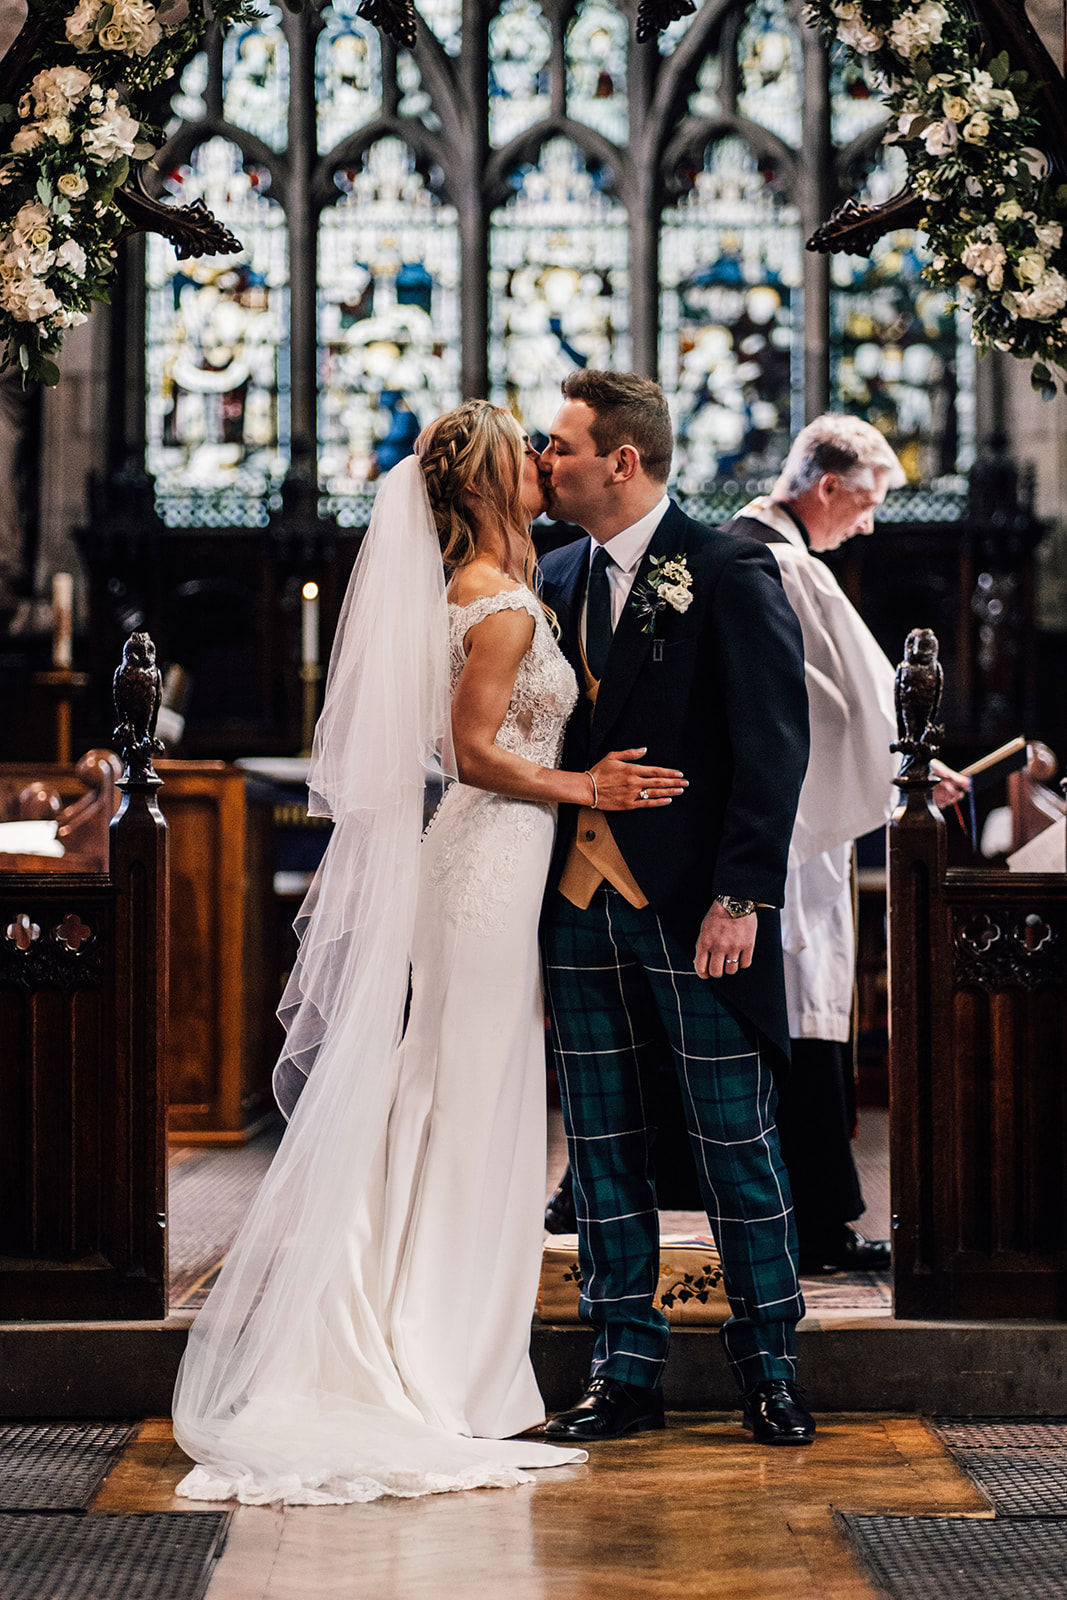 First kiss at wedding in Saint Peters Church in market Bosworth